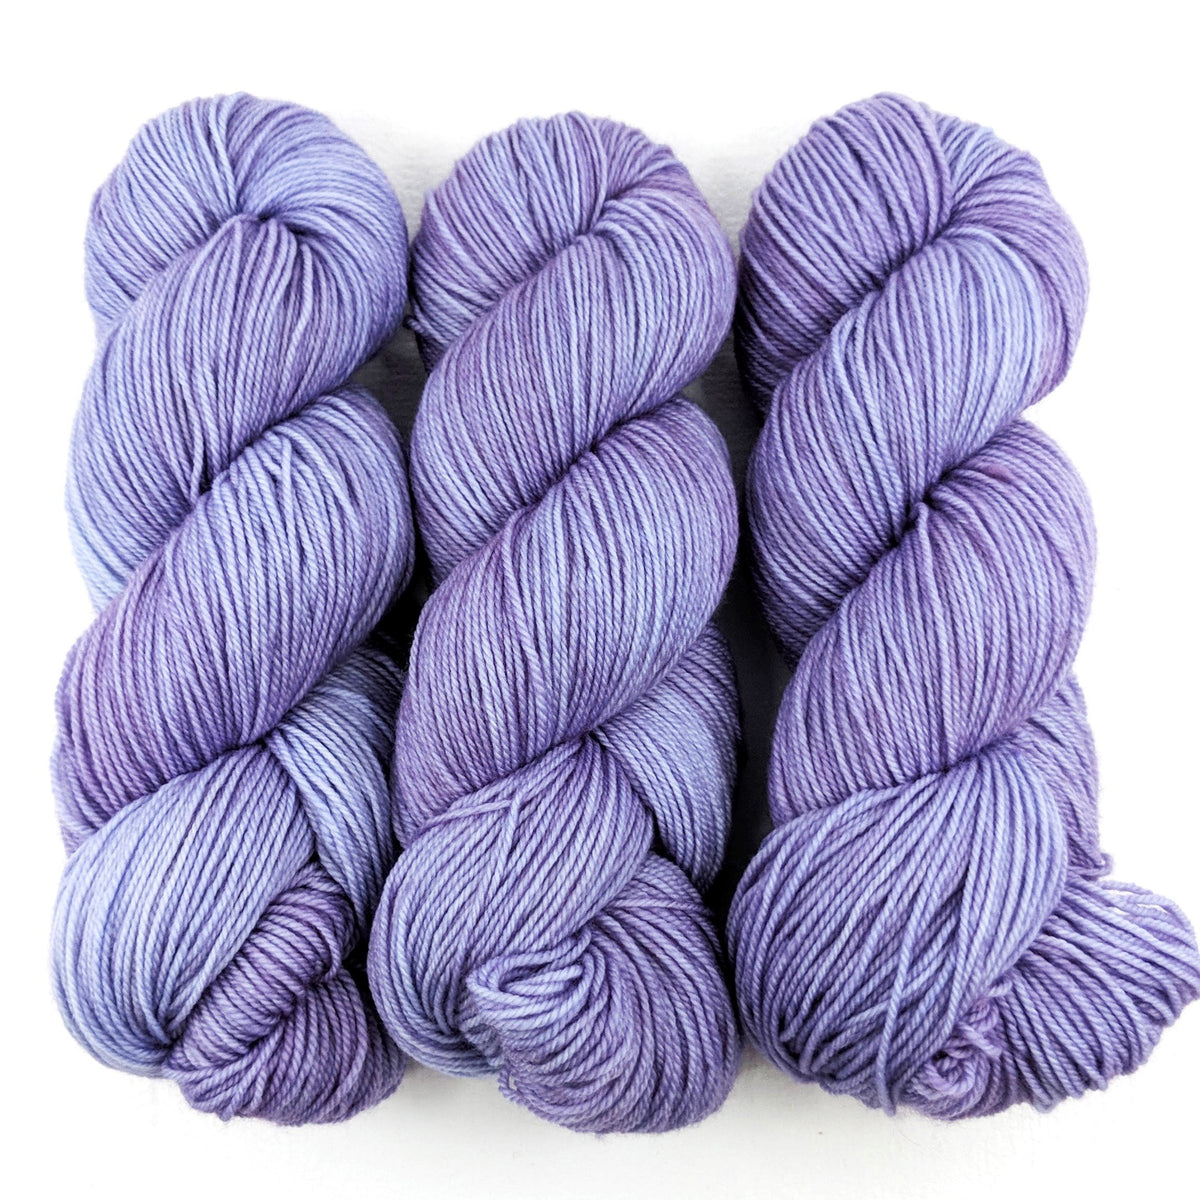 English Lavender in Fingering / Sock Weight